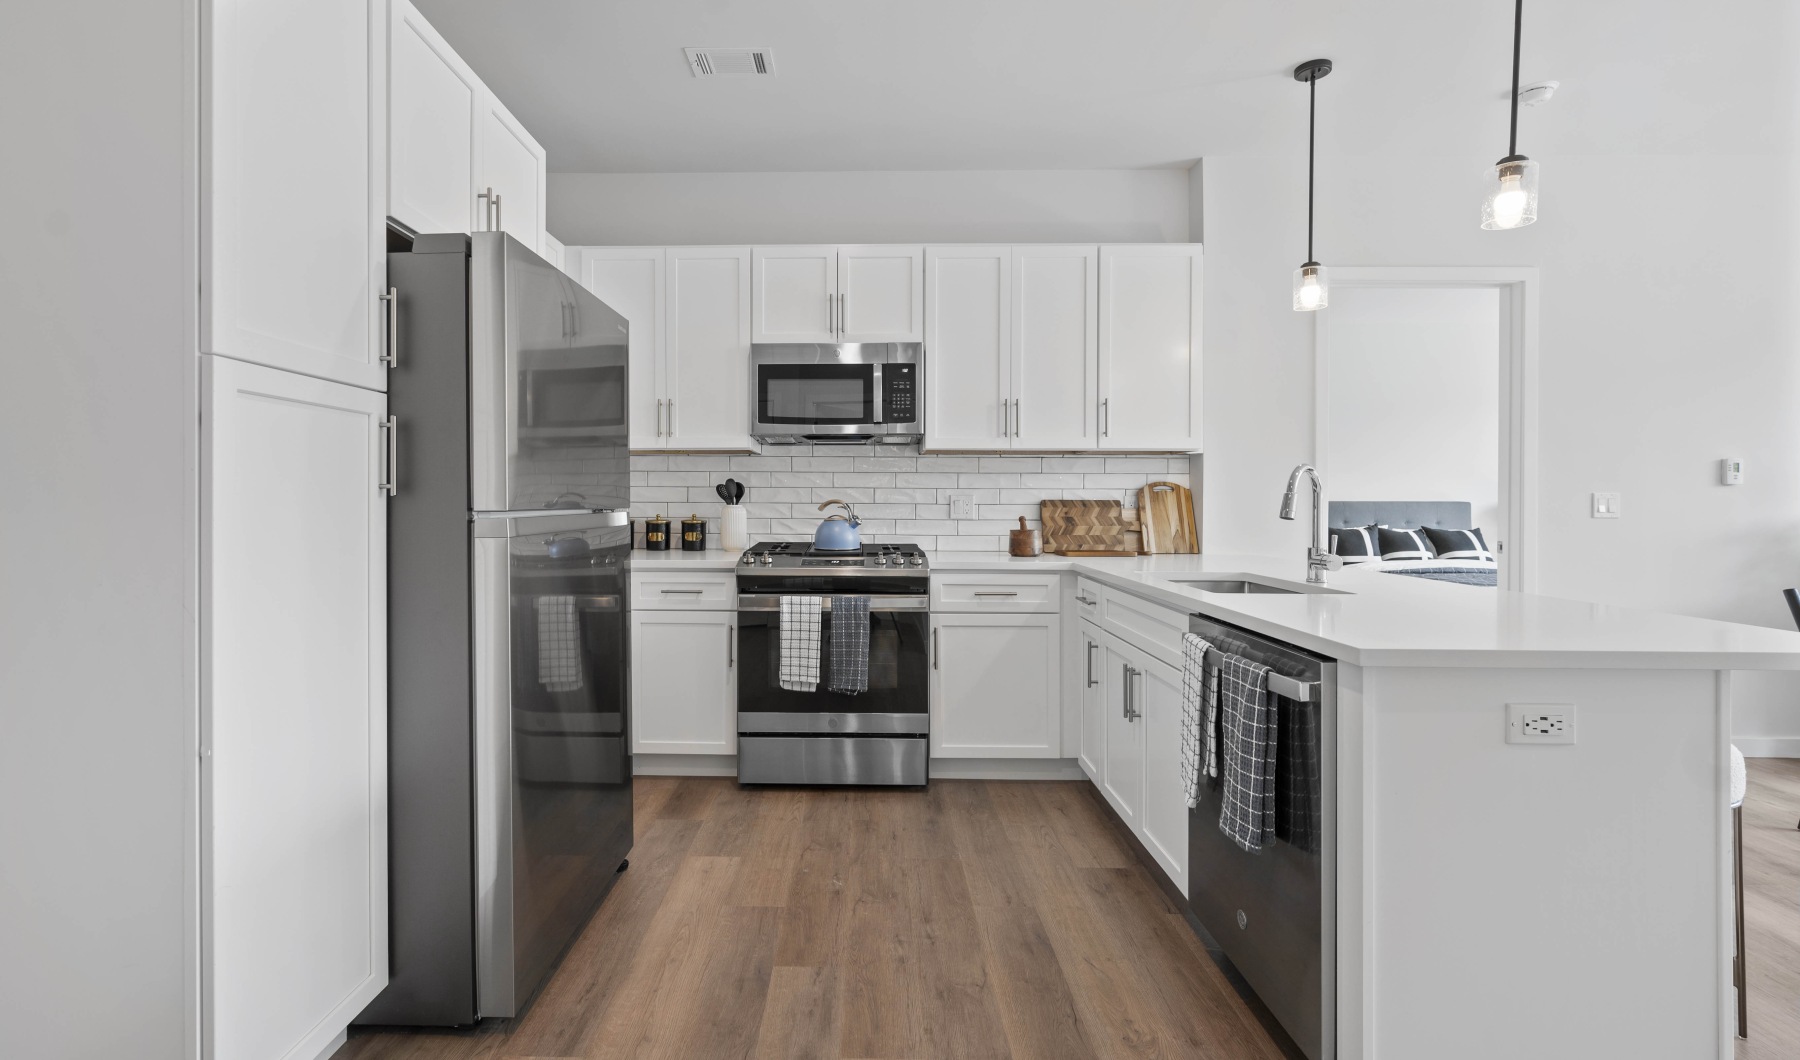 Luxury apartment kitchen with white cabinetry, white tile backsplash, kitchen island, stainless steel appliances, and wood like flooring 